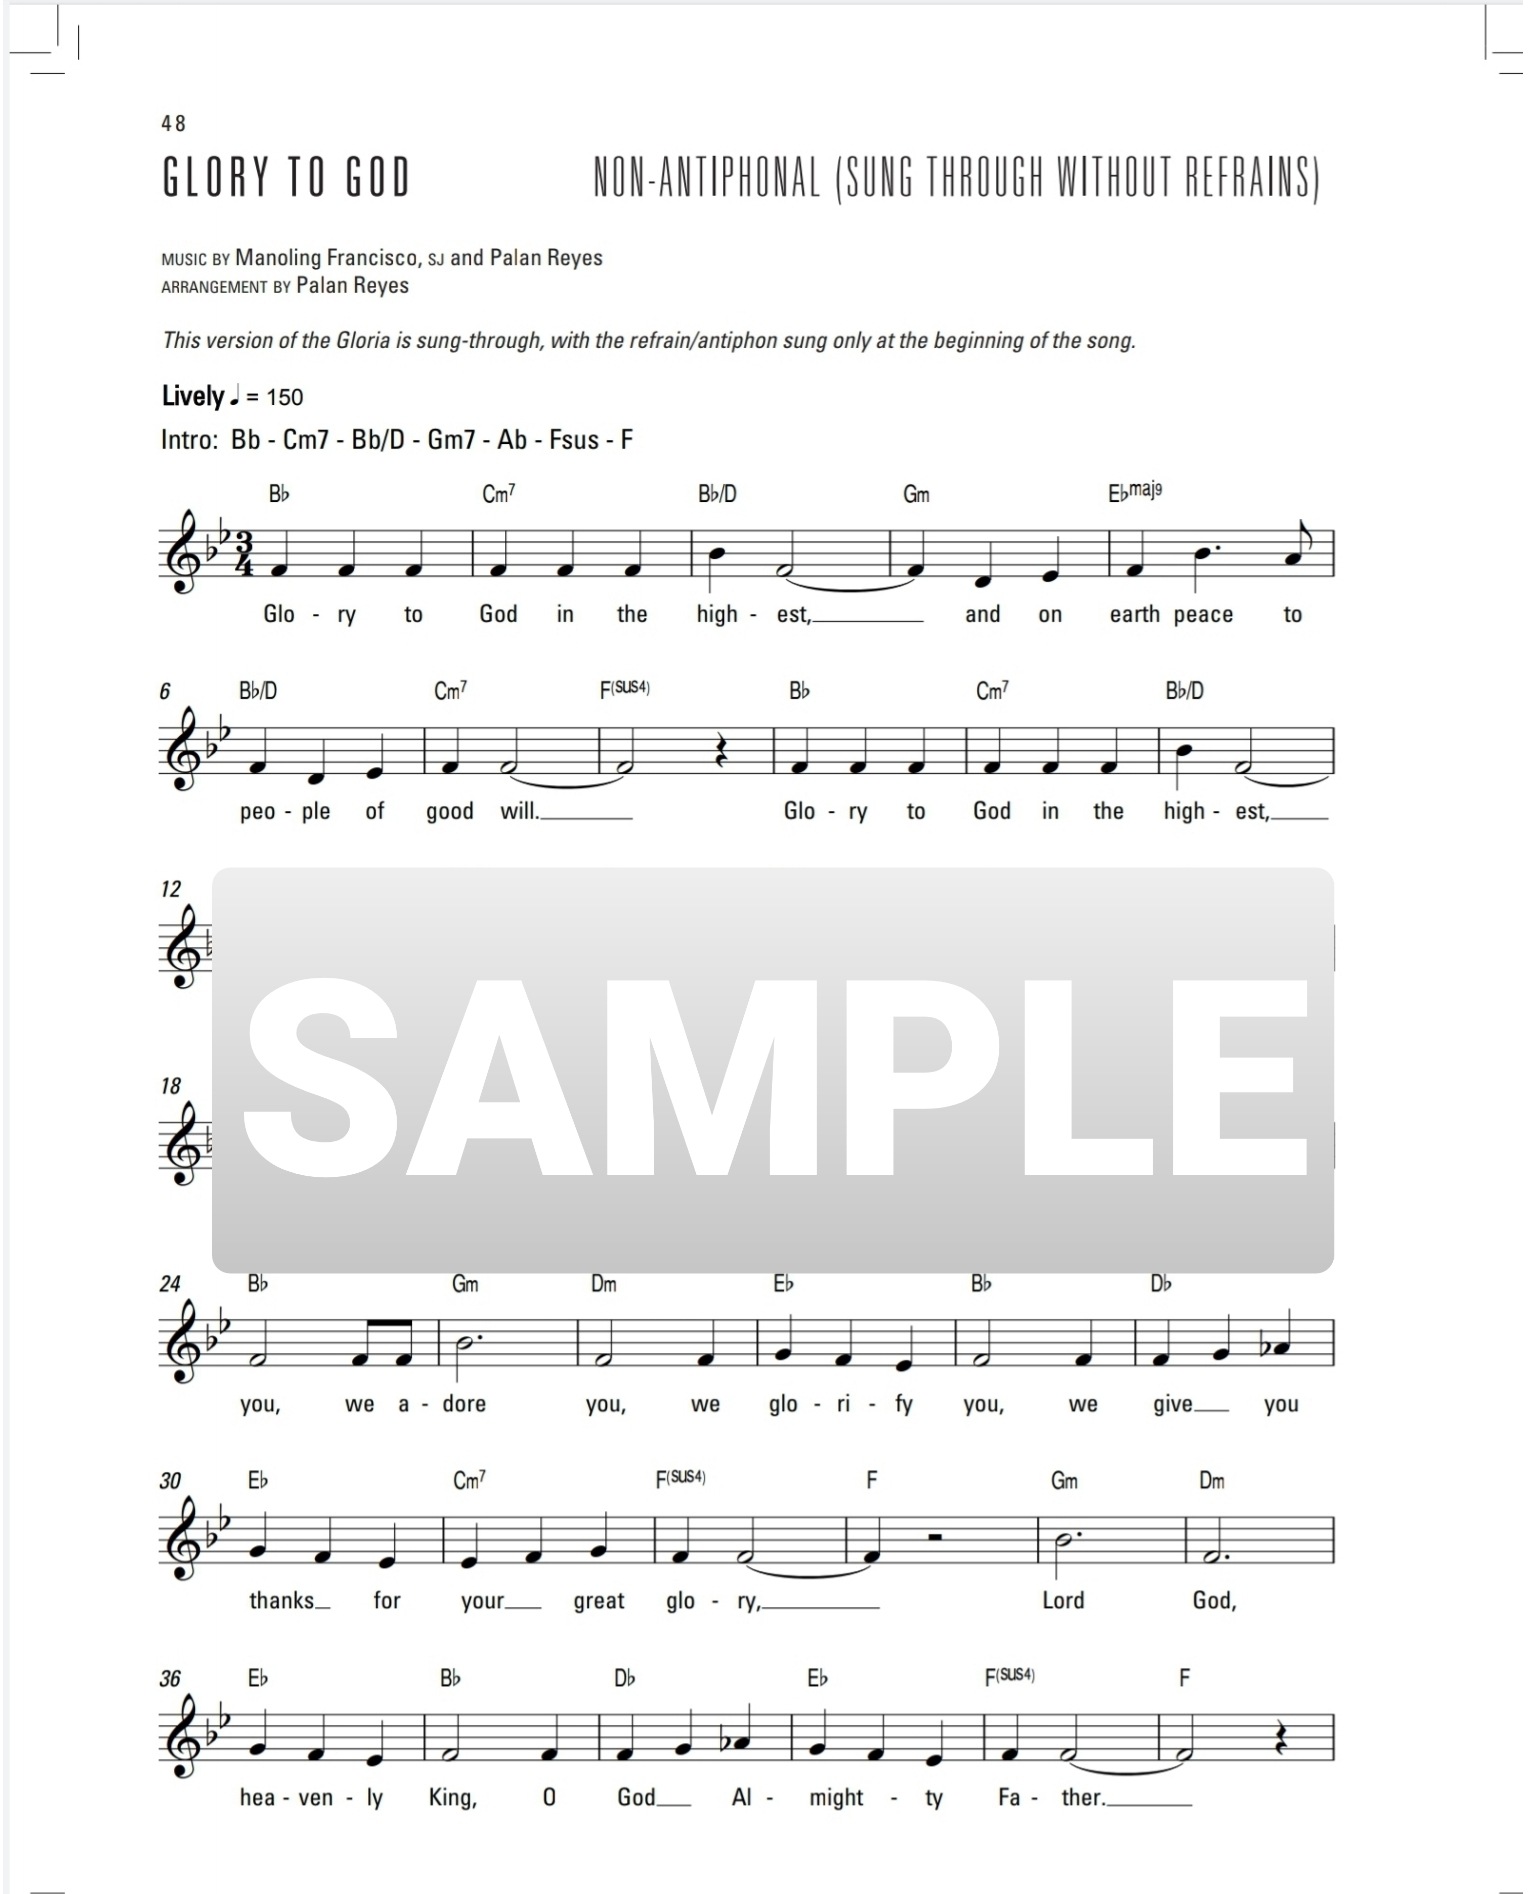 Glory to God by MVF (non-antiphonal) – Music Sheet